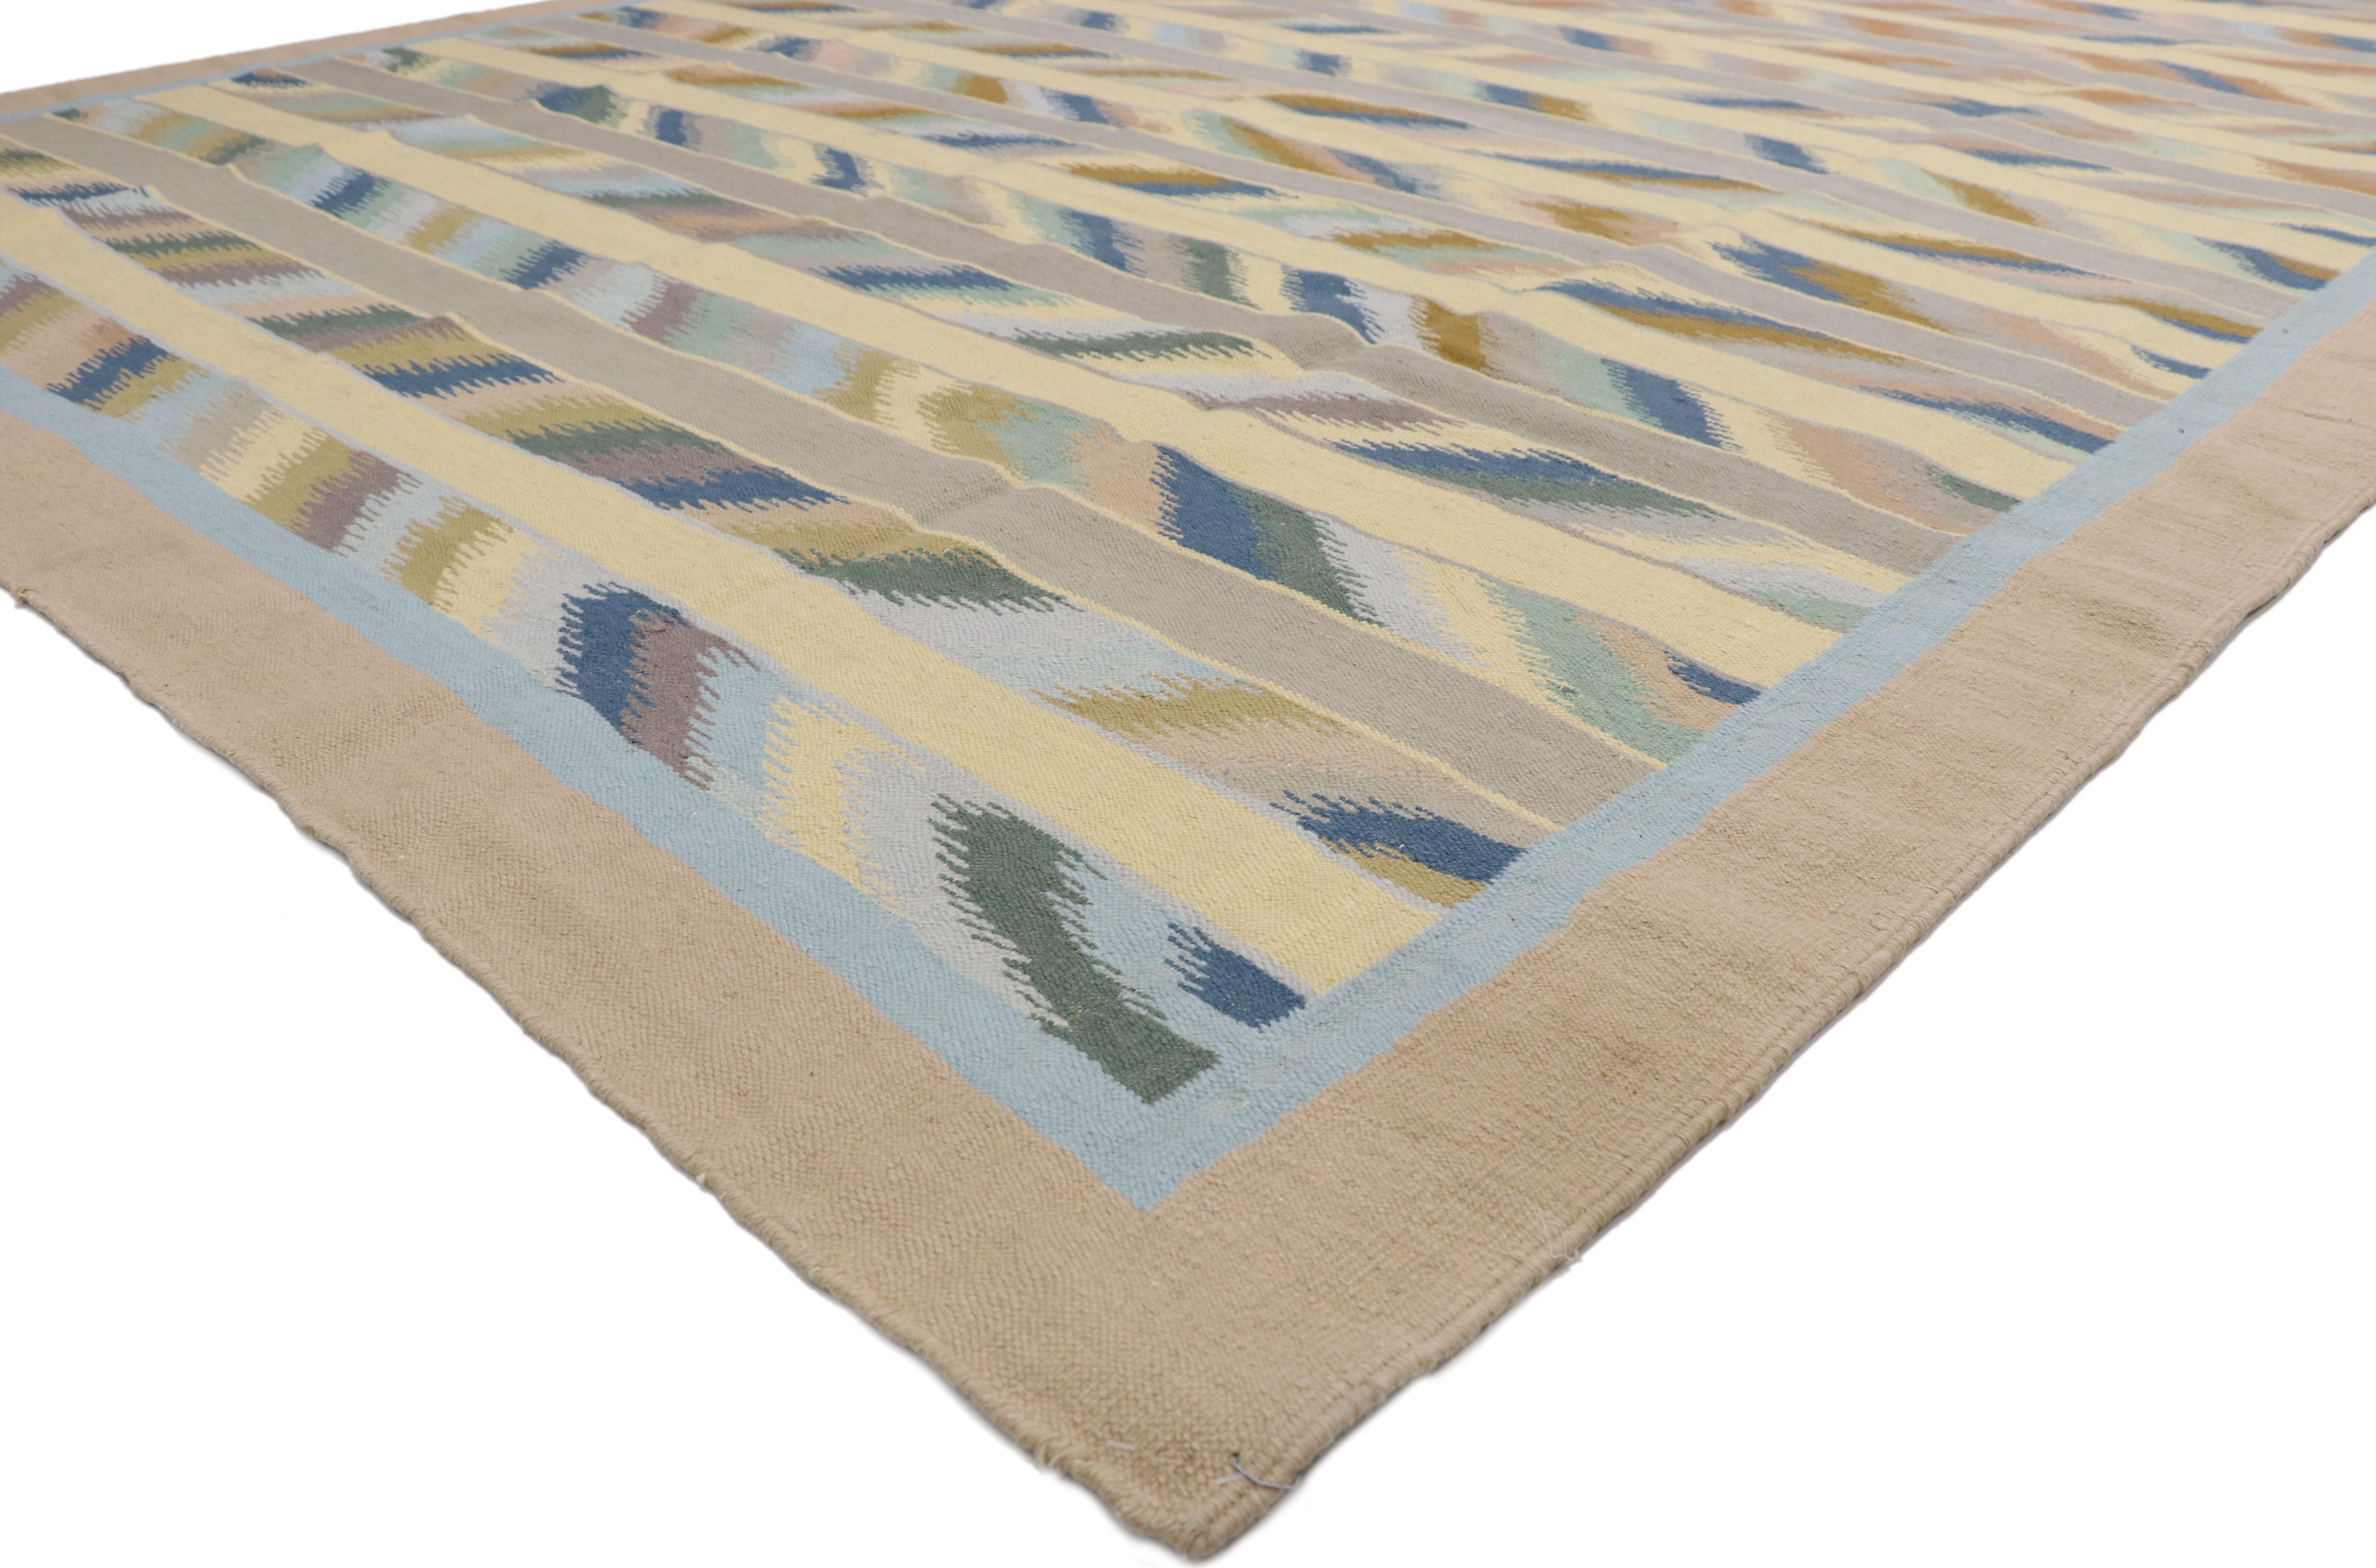 76596, vintage Dhurrie rug with Bohemian Southwestern Desert style. With its southwestern vibes and geometric design combined with pastel colors, this handwoven wool vintage Dhurrie rug embodies a Bohemian desert modern style. The flat-weave Kilim